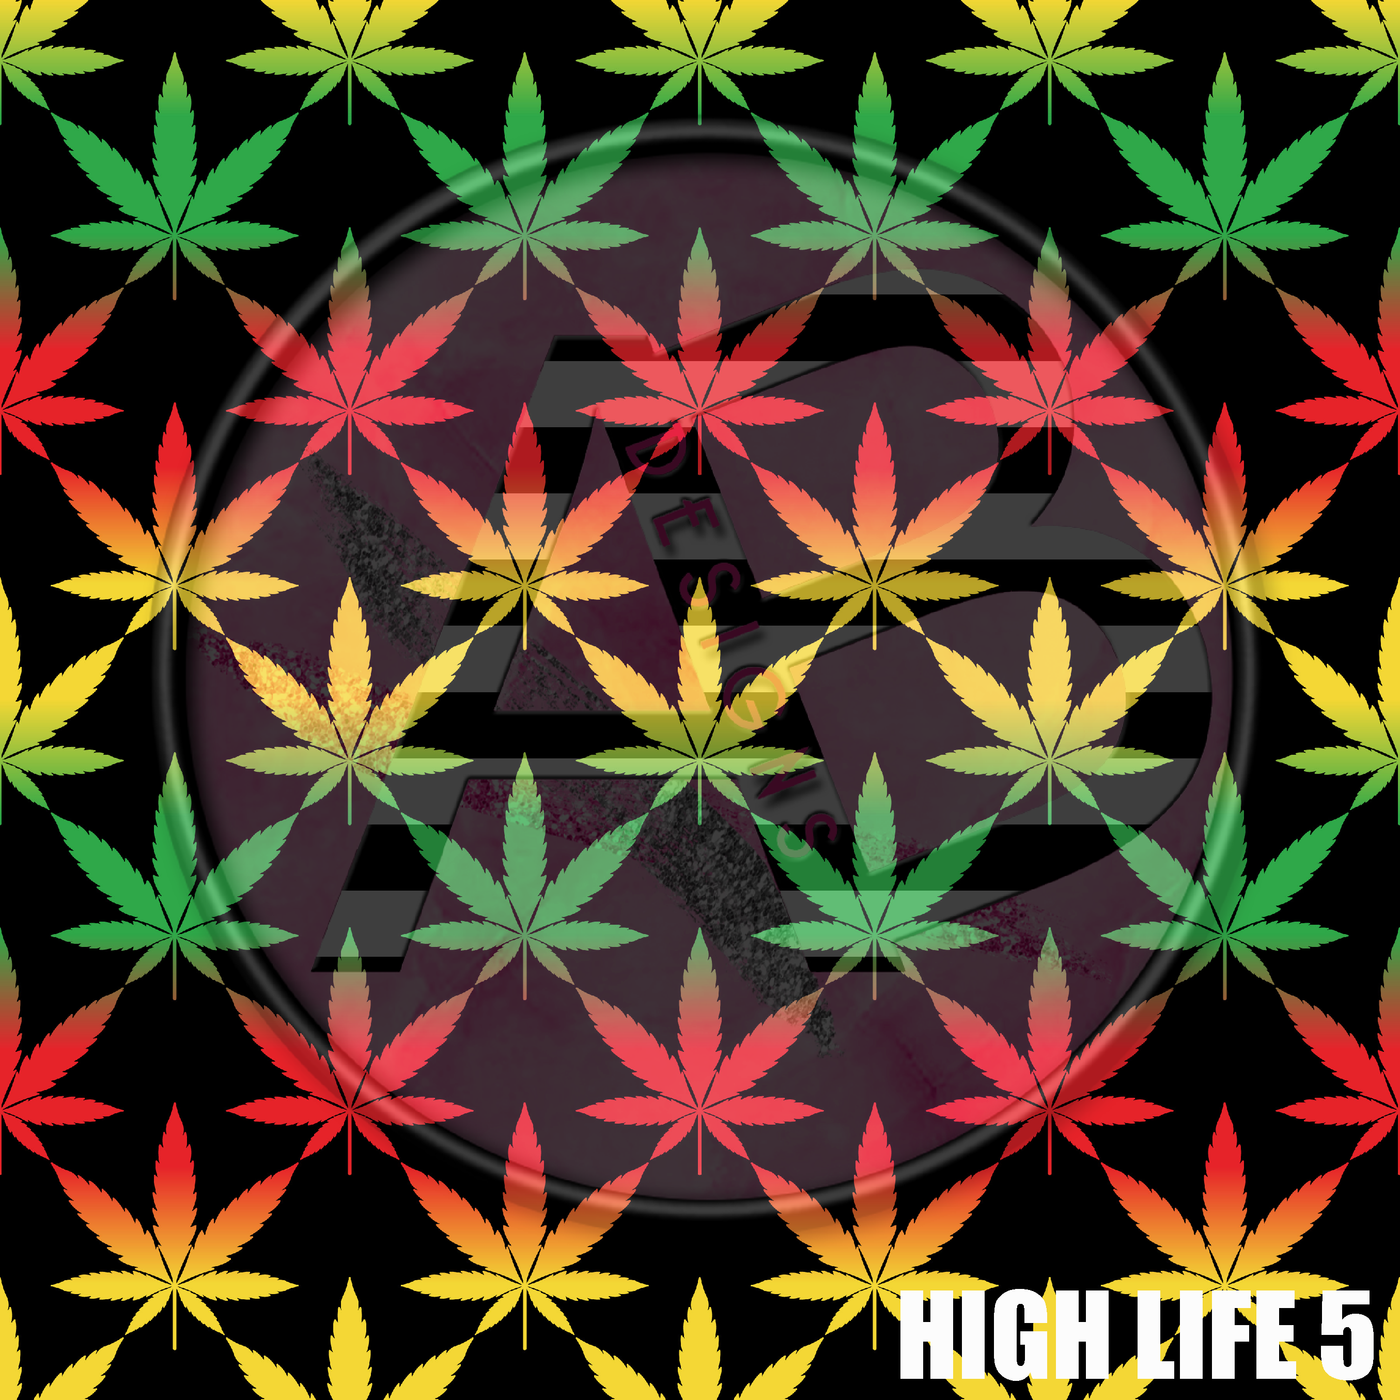 Adhesive Patterned Vinyl - High Life 5